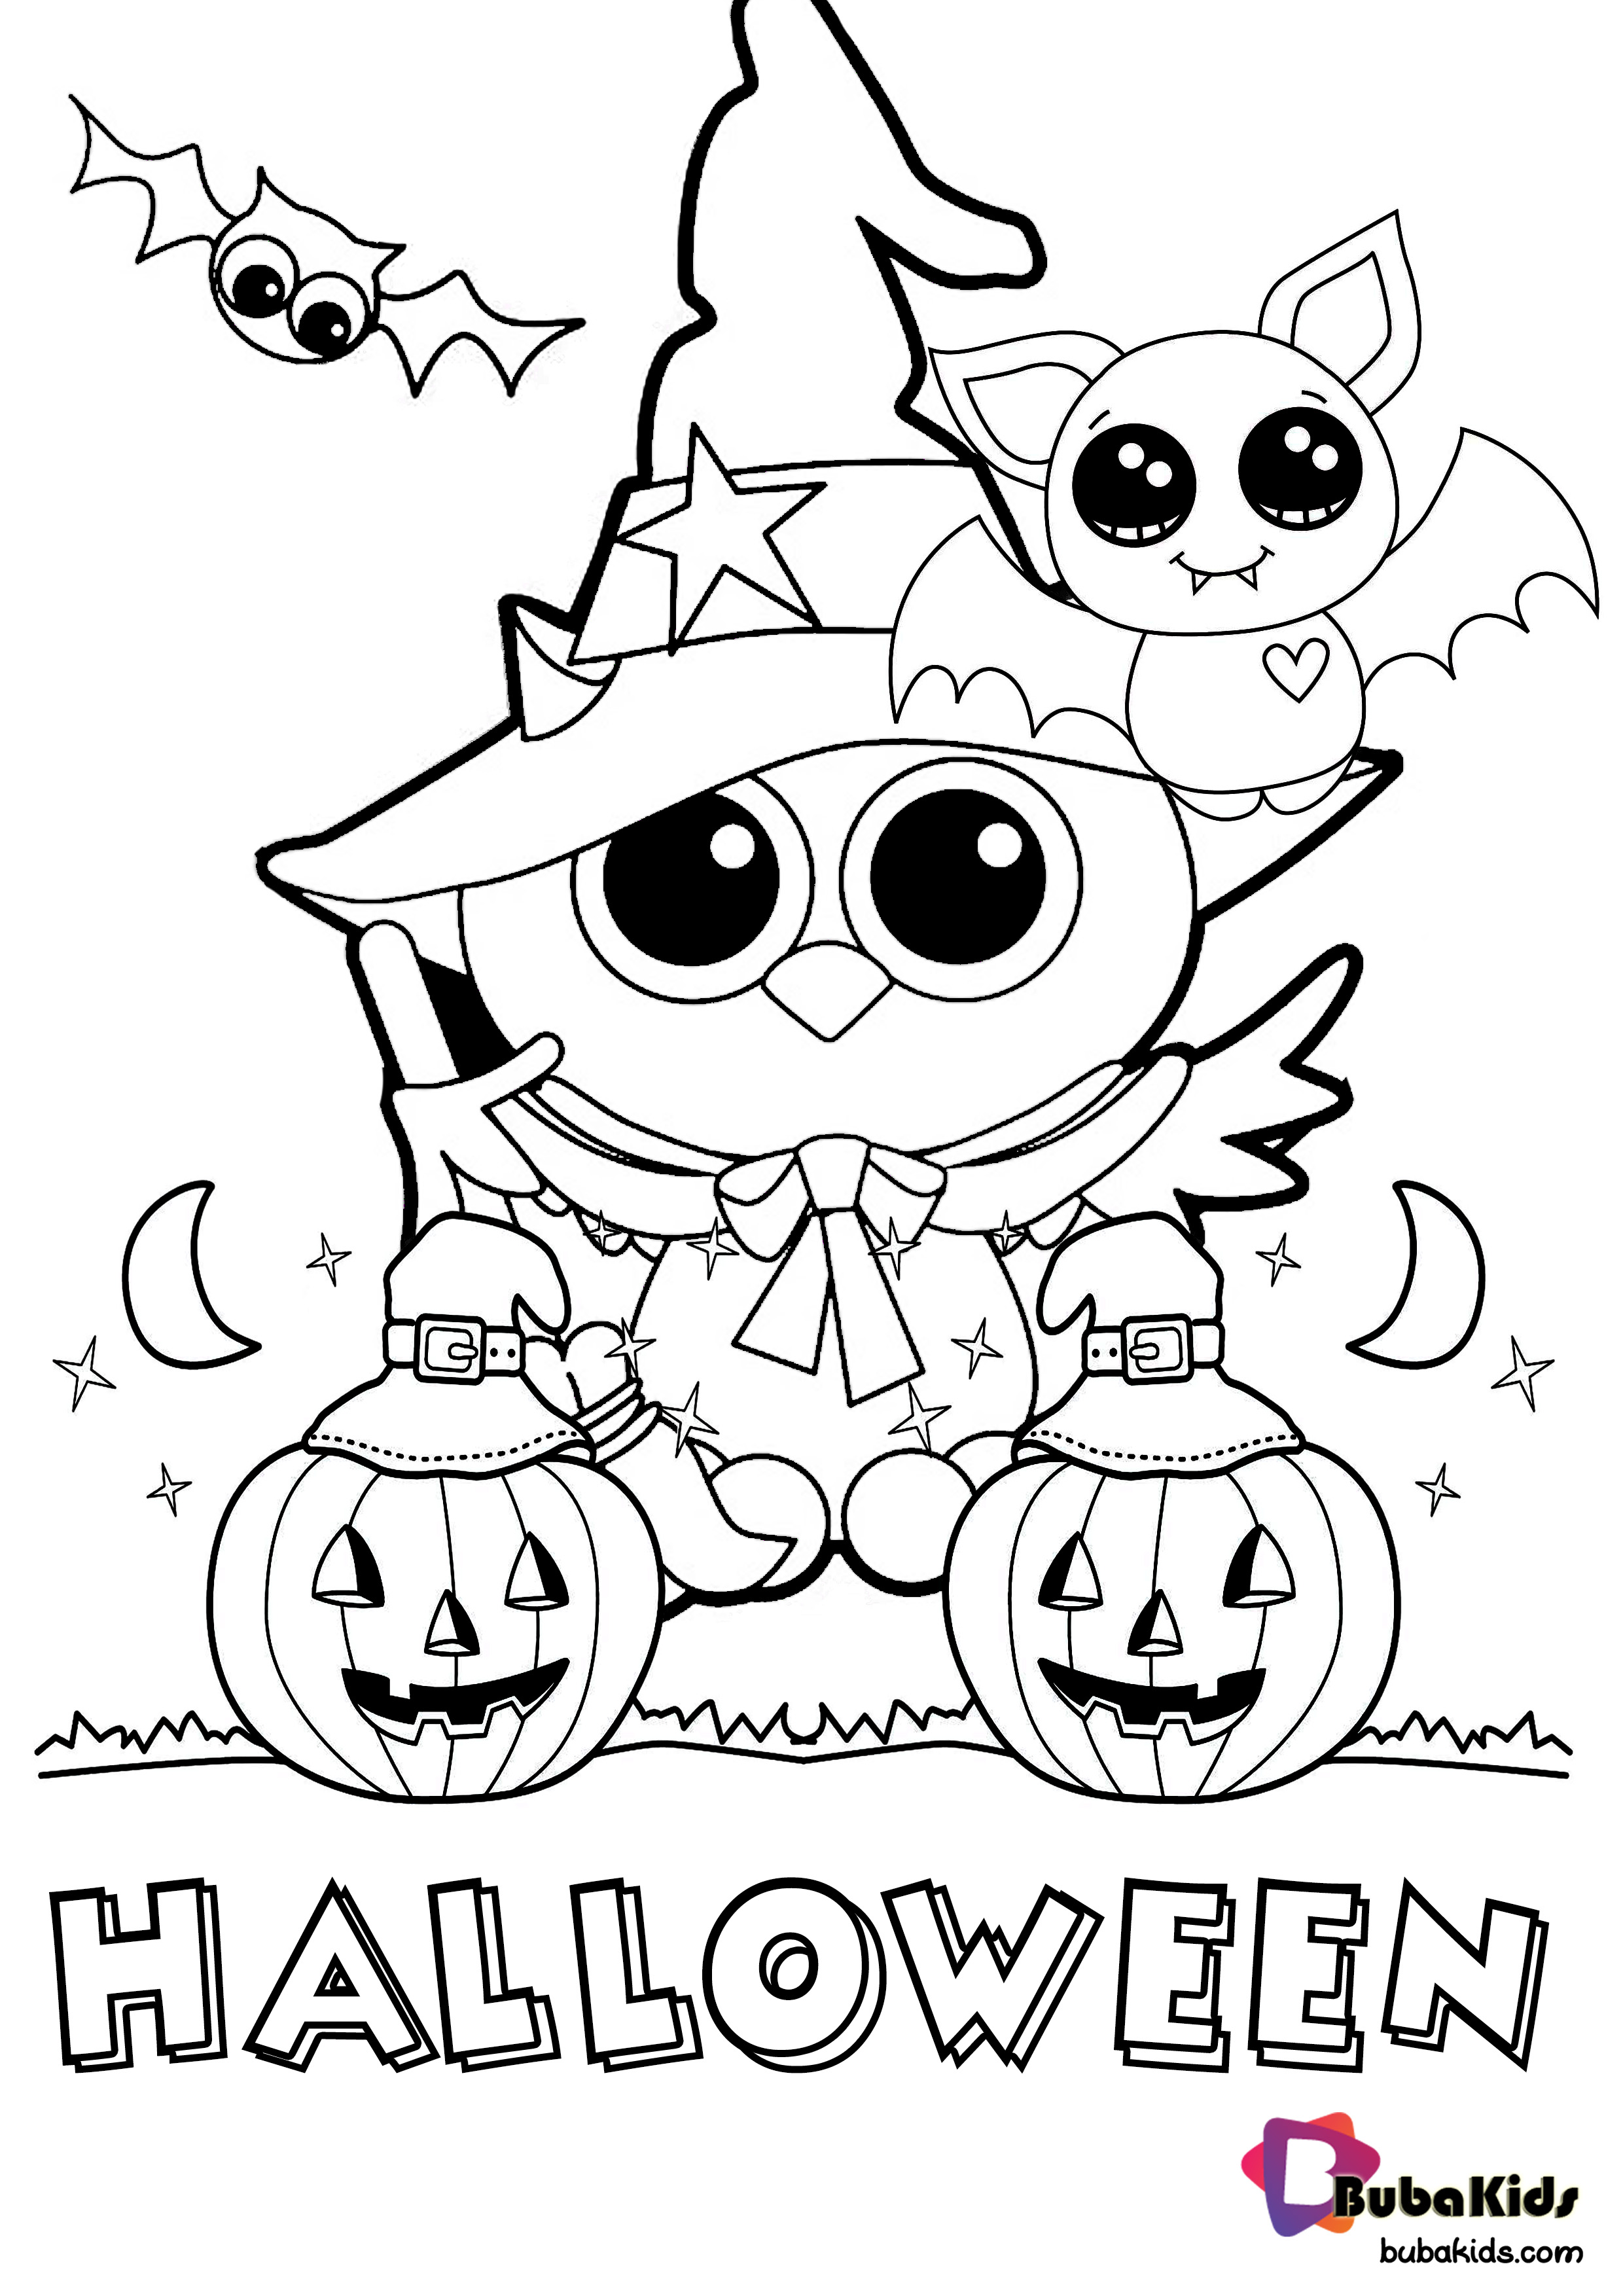 halloween-coloring-pages-printable-free-bubakids